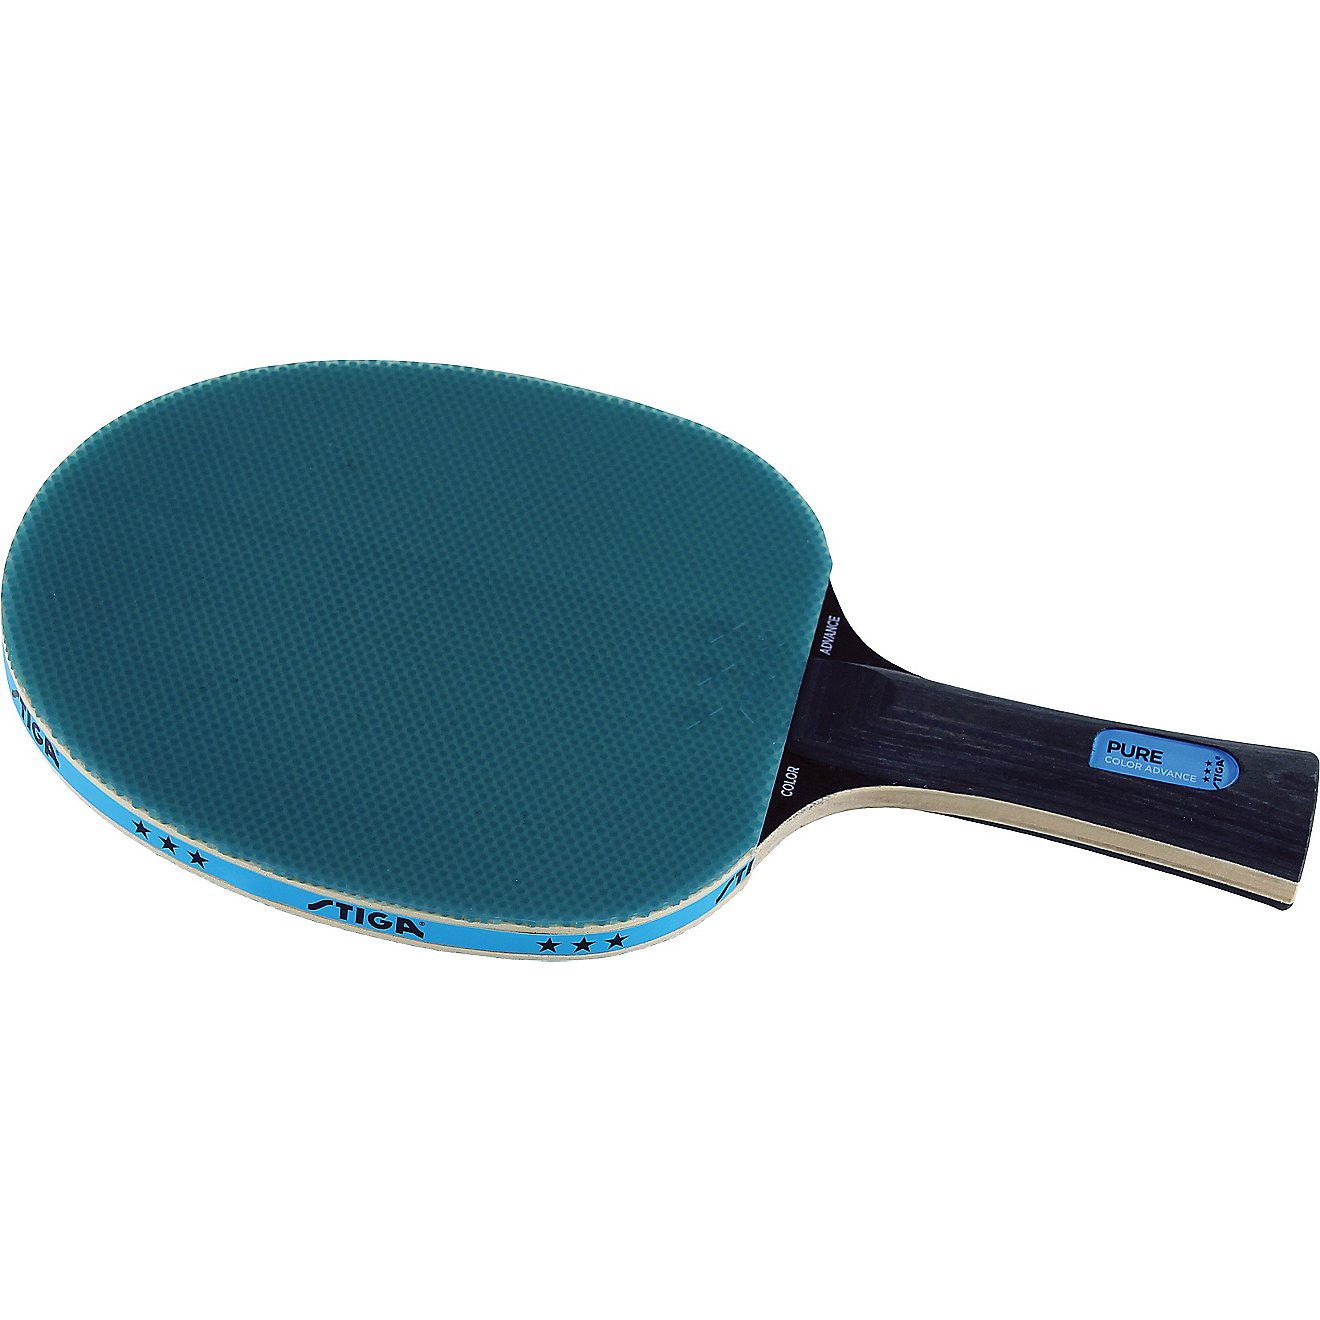 Stiga® Pure Tennis Table Racket                                                                                                 - view number 1